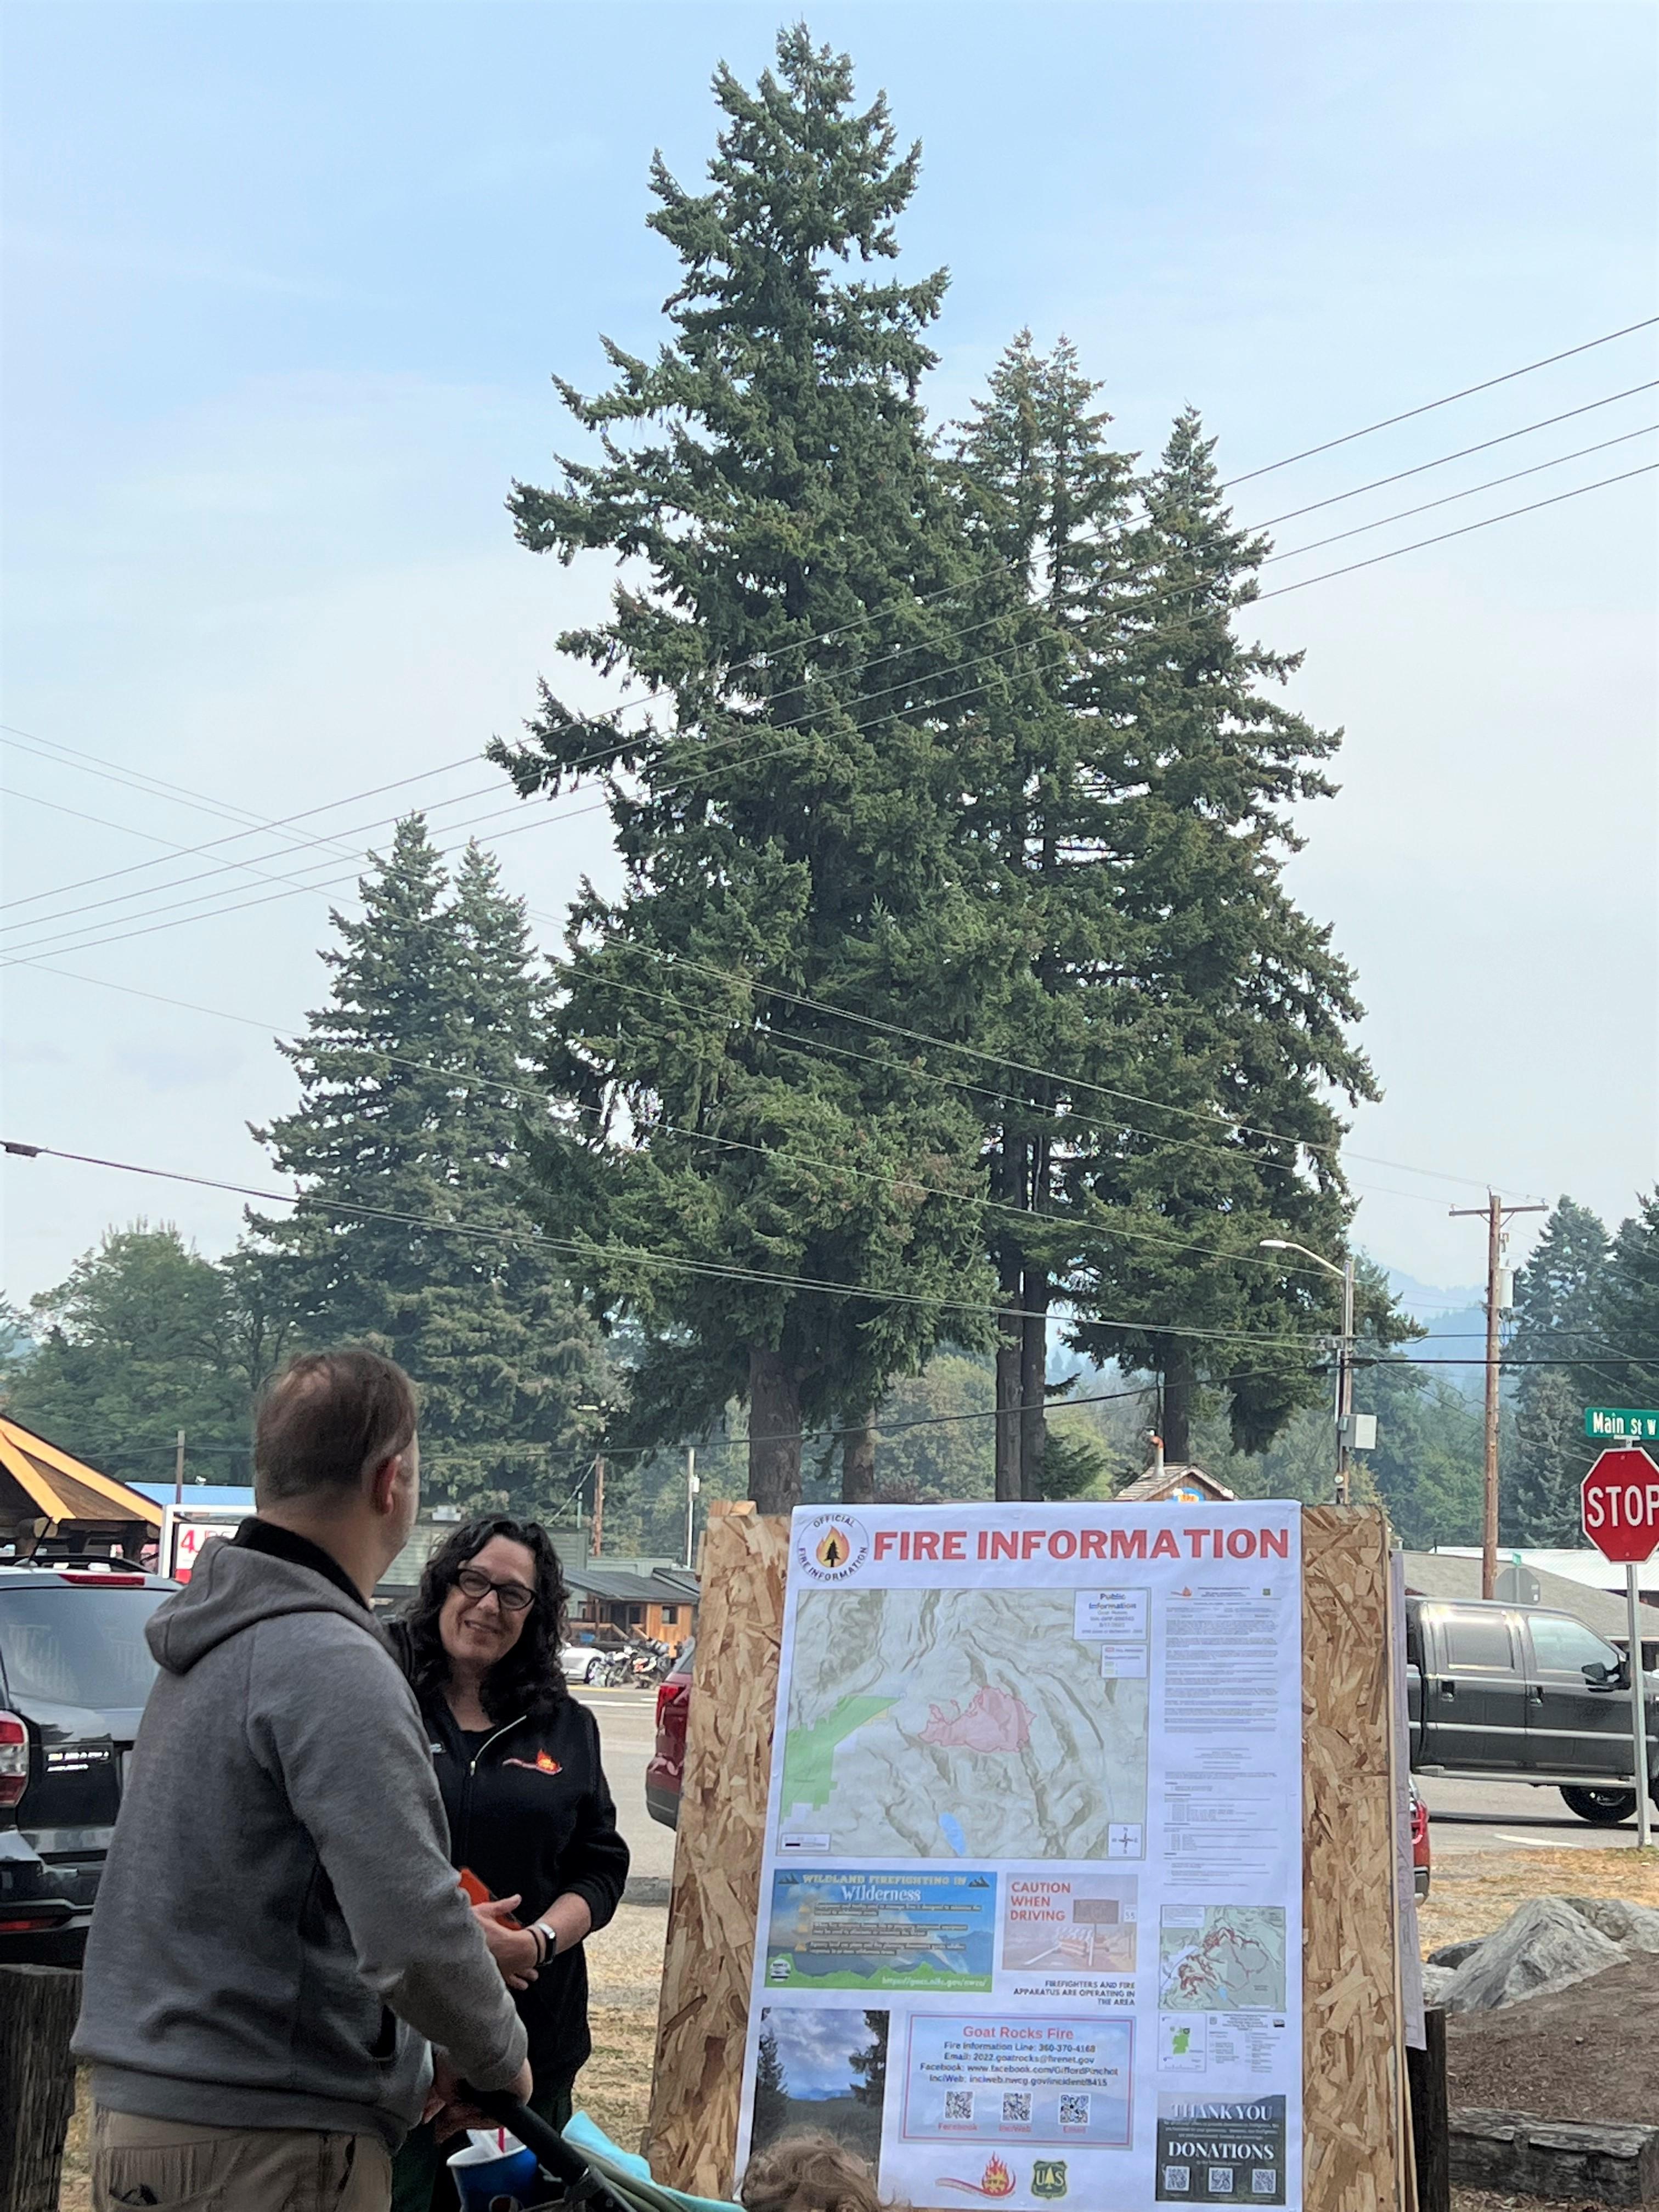 In the background stands a large Fir tree. In front of that is a plywood sandwich board with a poster full of information and a map on it. Next to it are 2 people, one is a public information officer and the other is a member of the public asking the PIO.